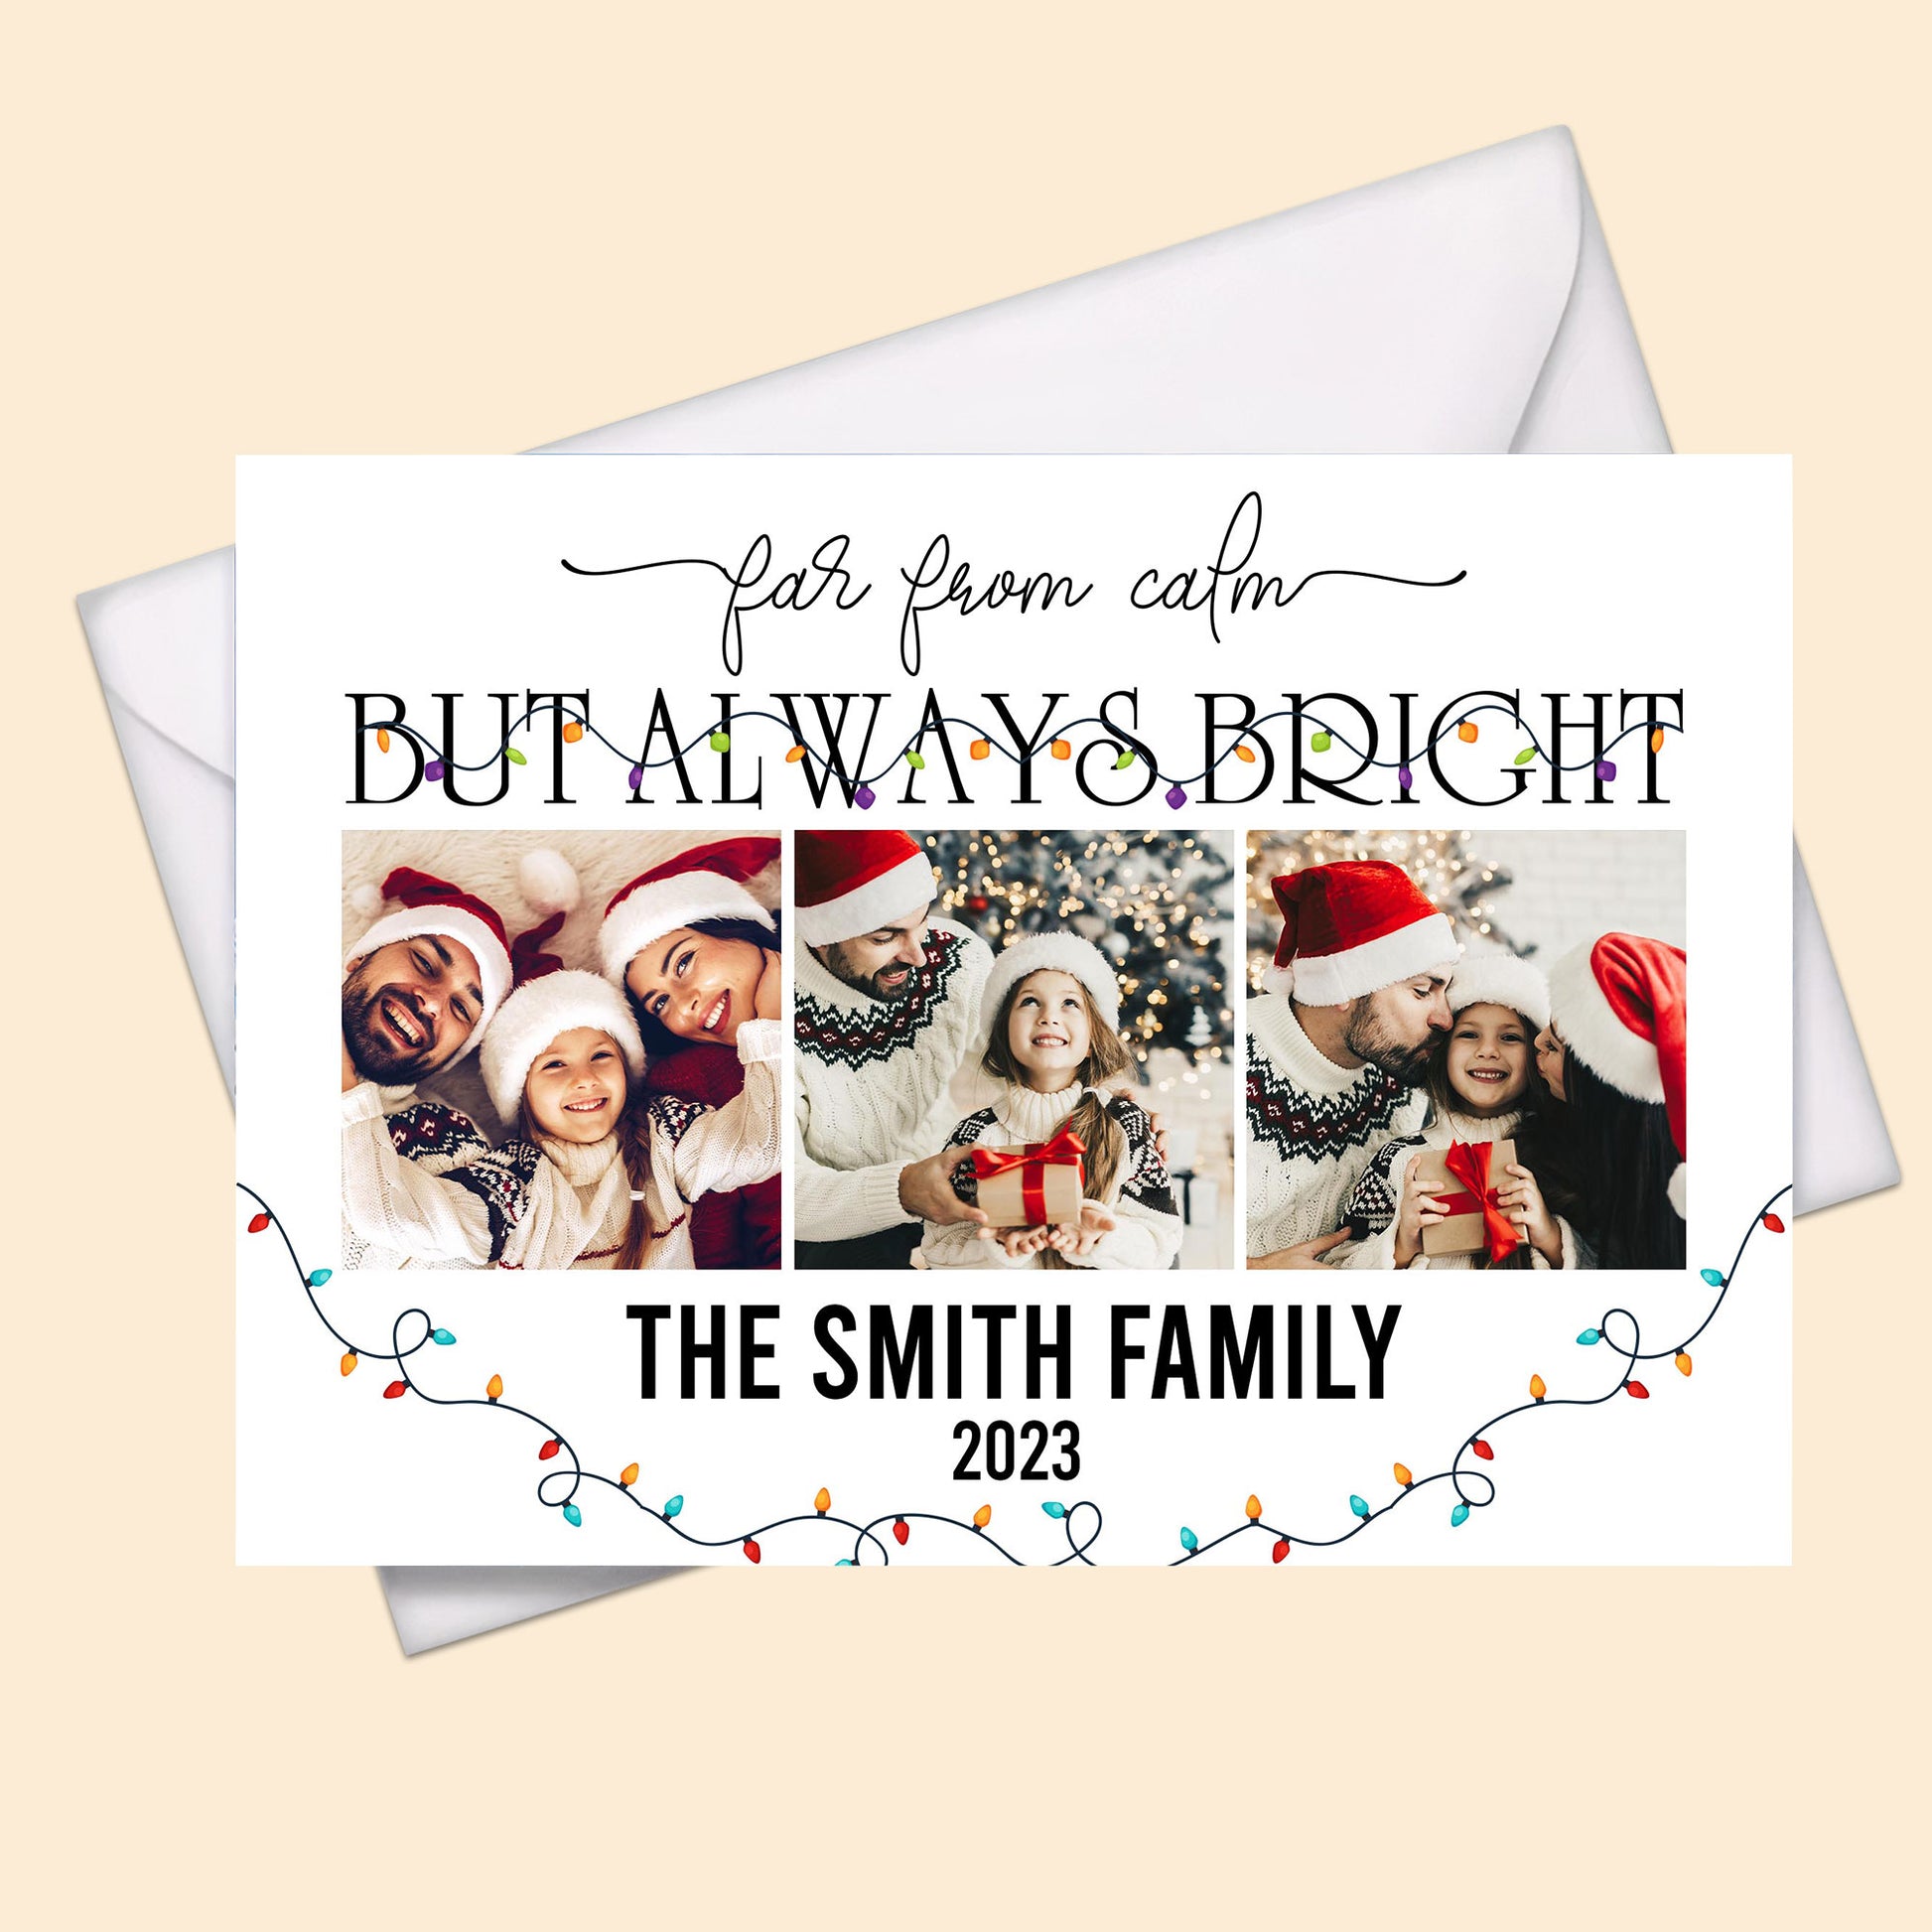 (Photo Inserted) Personalized Family Christmas Card - Gift For Family Members, Friends, And Close Neighbors - Christmas Card With Family Portrait 